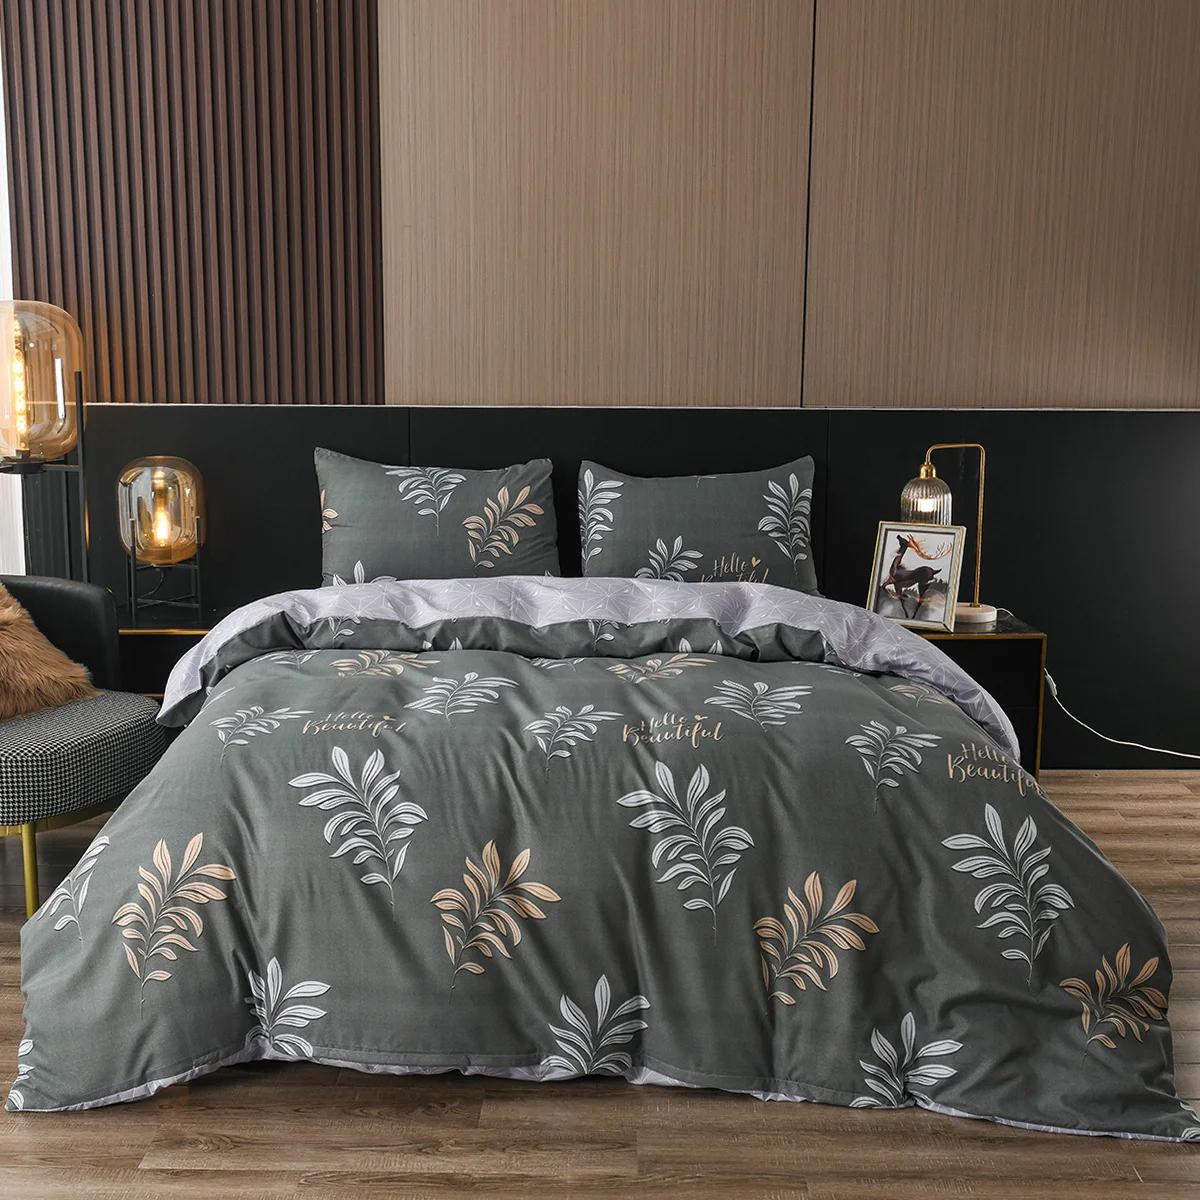 

Textured Design Tree Leaves Printed Comforter Cover King Queen Size,Botanical Duvet Cover Set 100% Polyester Luxury Bedding Set